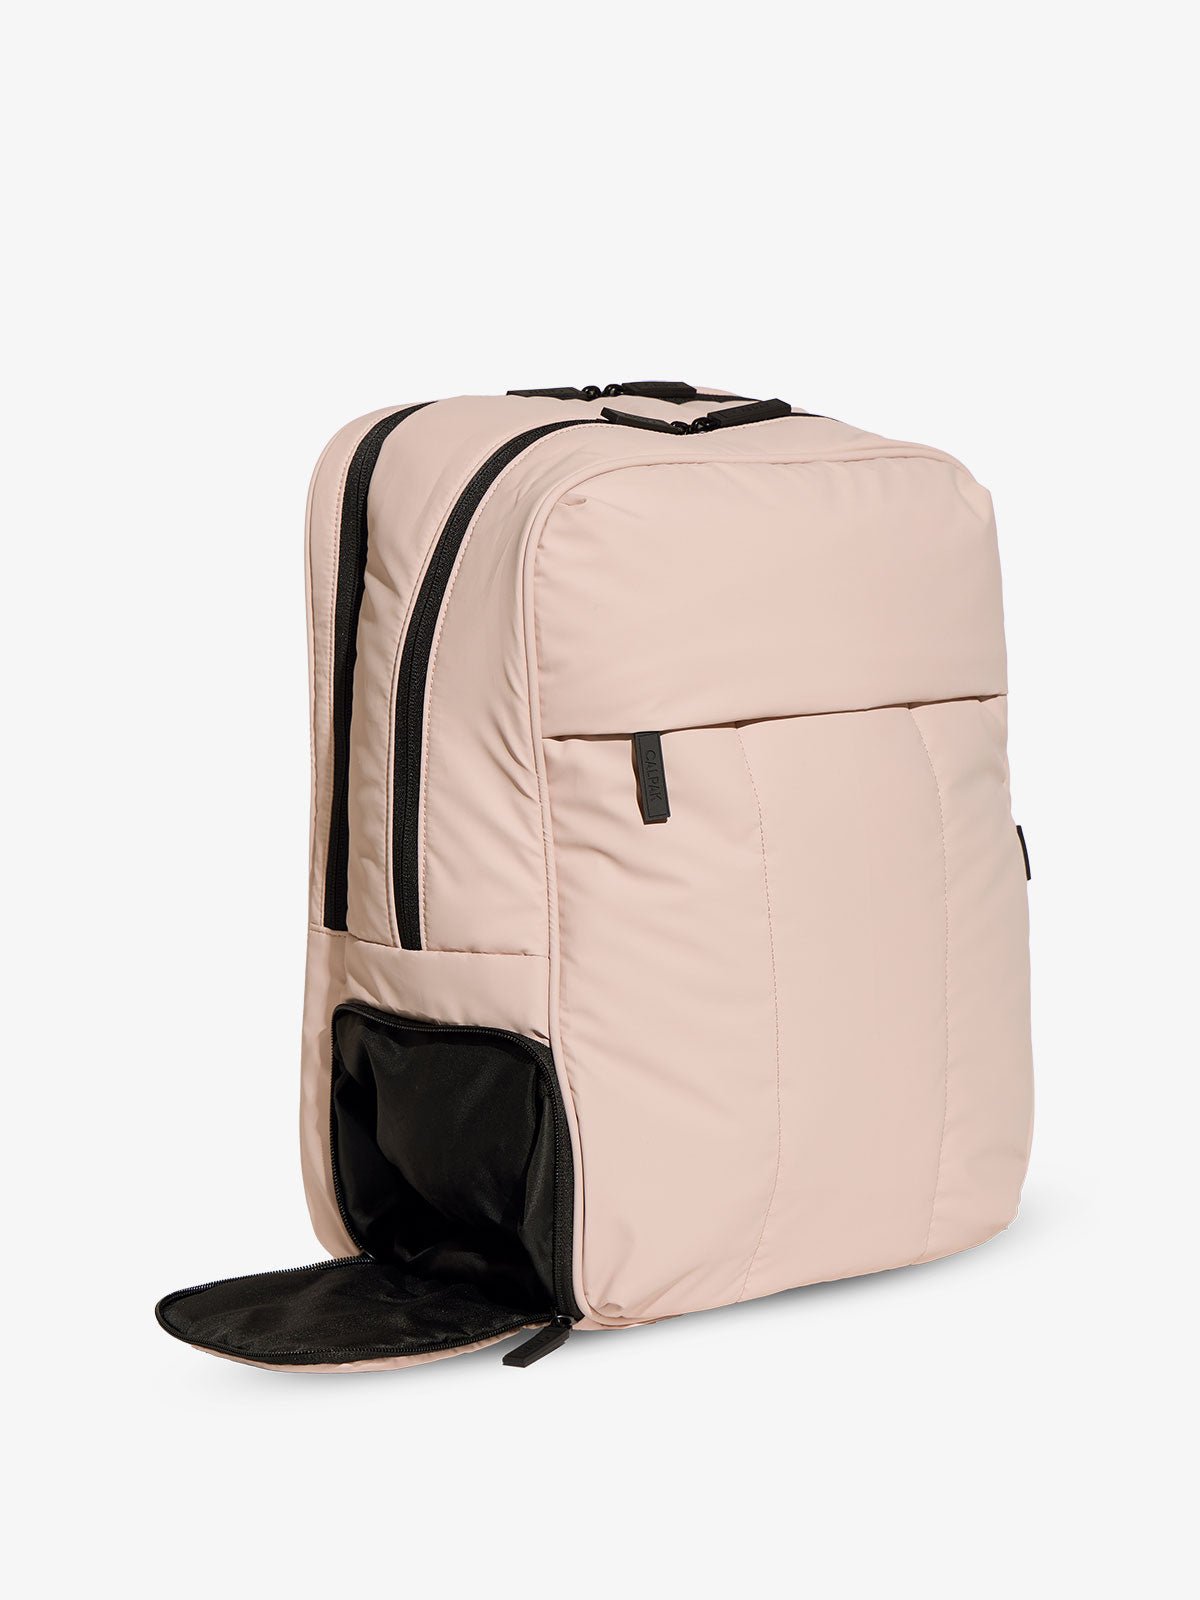 Luka 17 inch Laptop Backpack with shoe compartment in pink rose quartz